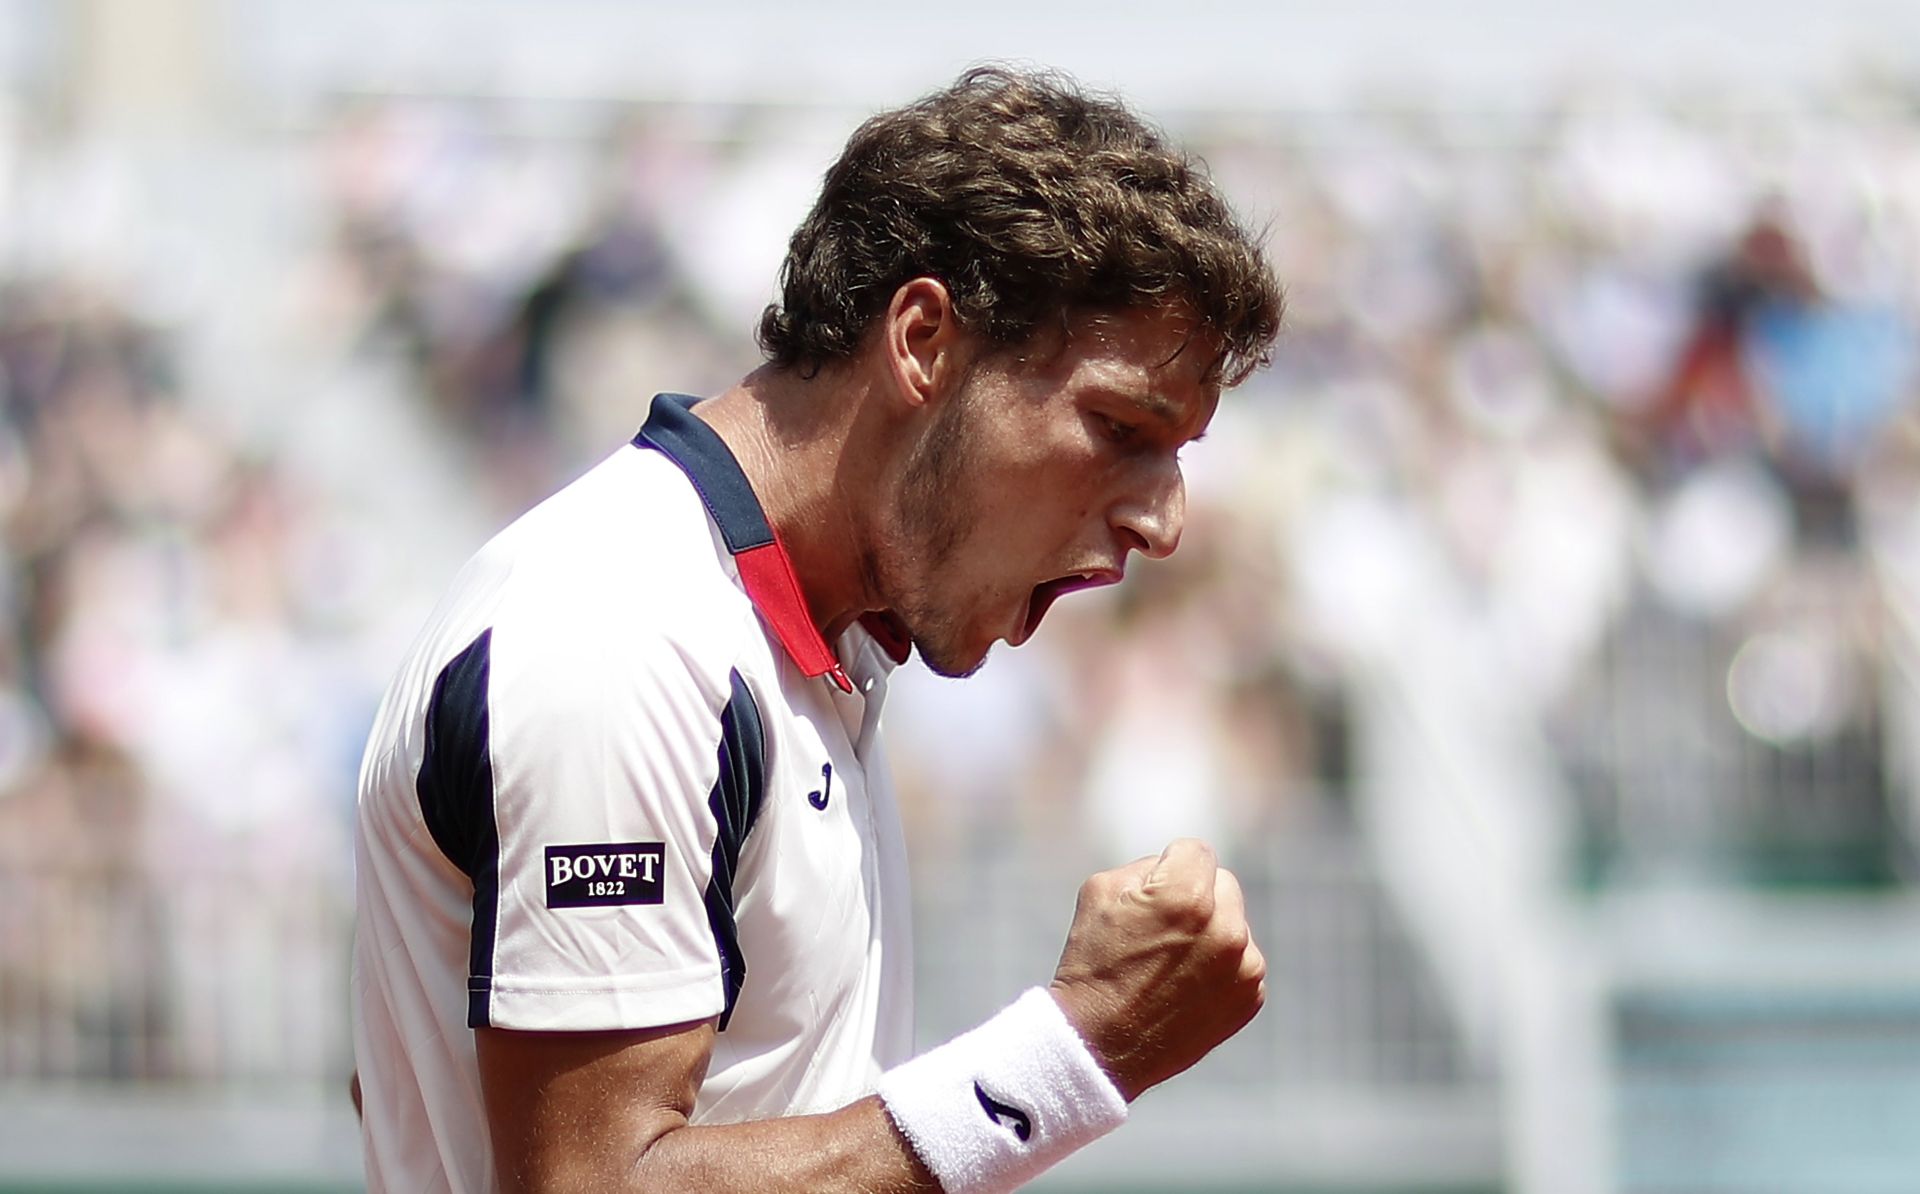 epa06005272 Pablo Carreno Busta of Spain reacts after winning the first set against Grigor Dimitrov of Bulgaria during their men’s single 3nd round match during the French Open tennis tournament at Roland Garros in Paris, France, 02 June 2017.  EPA/YOAN VALAT